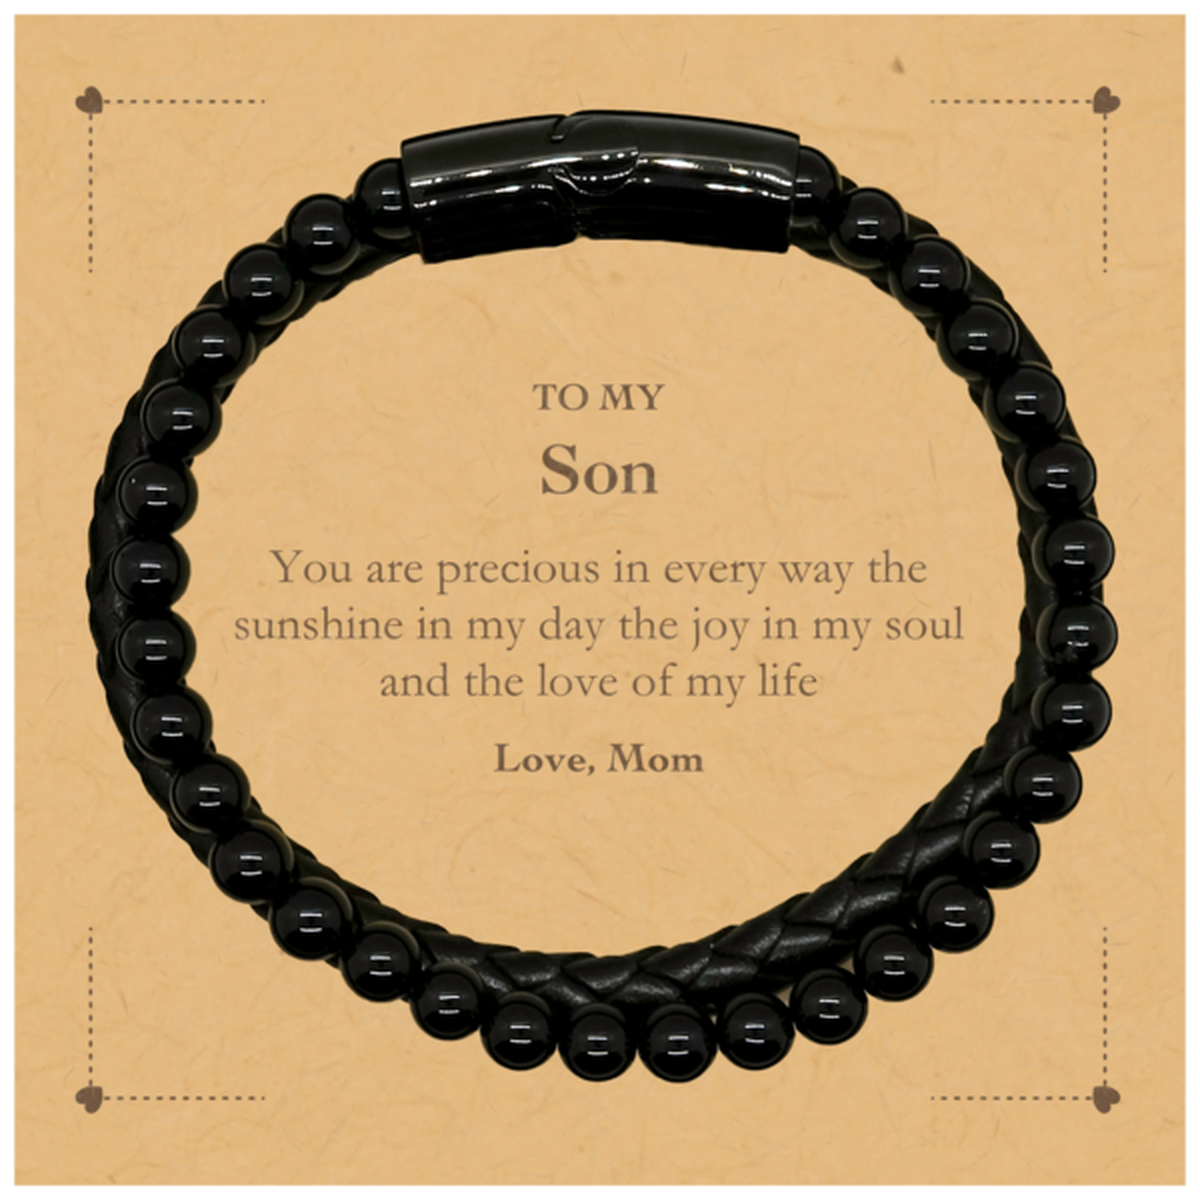 Graduation Gifts for Son Stone Leather Bracelets Present from Mom, Christmas Son Birthday Gifts Son You are precious in every way the sunshine in my day. Love, Mom